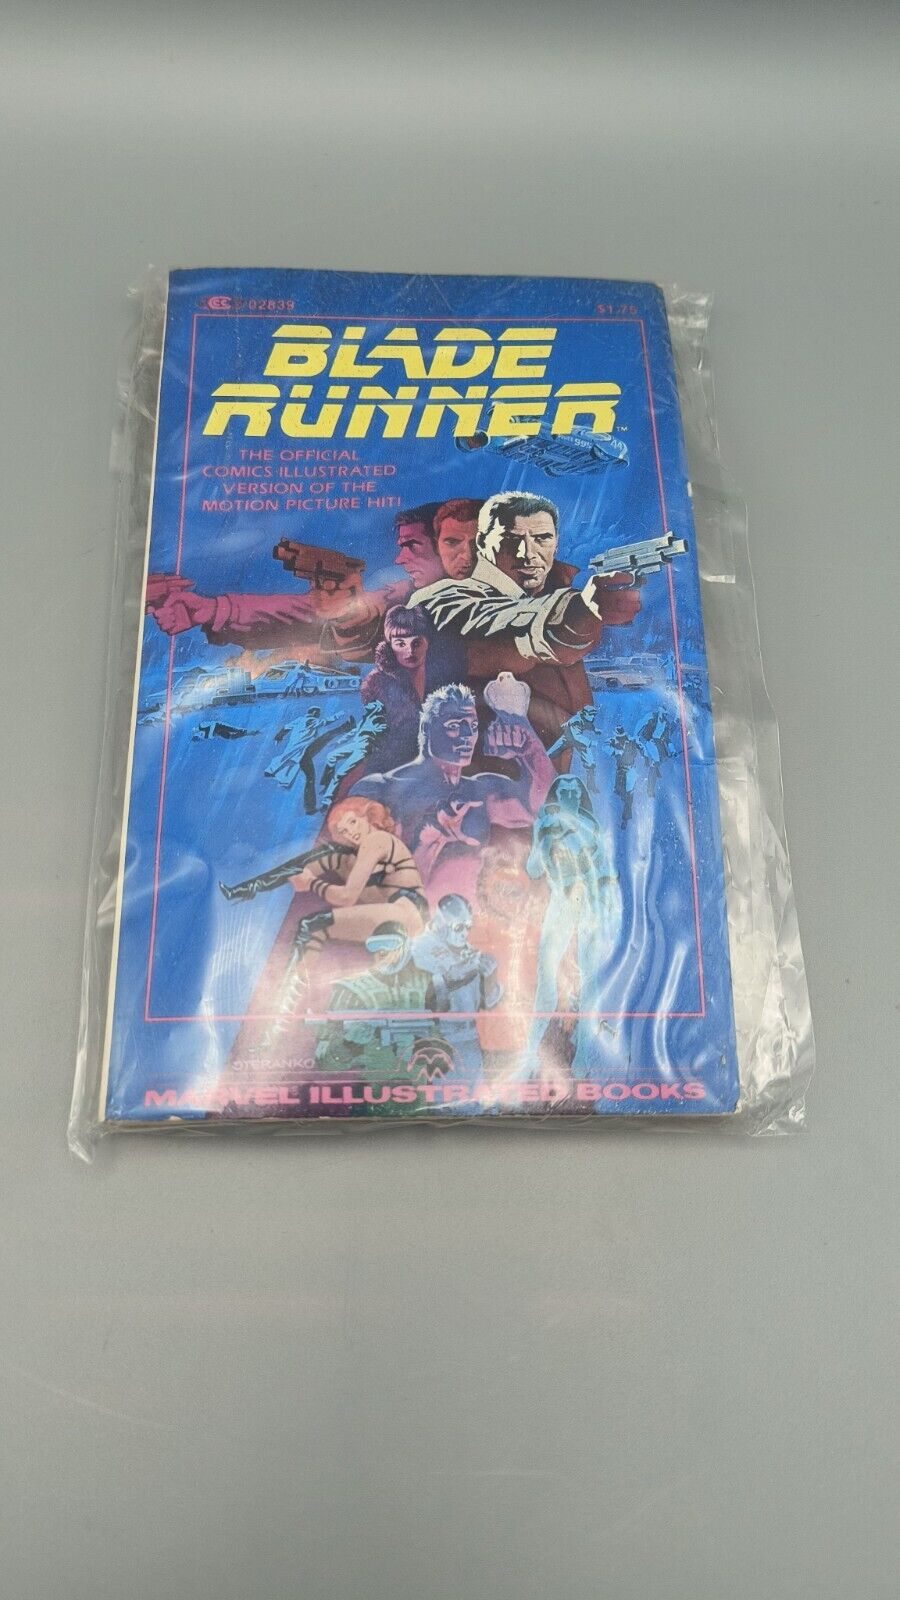 BLADE RUNNER Marvel Illustrated Books - Official First Edition 1982